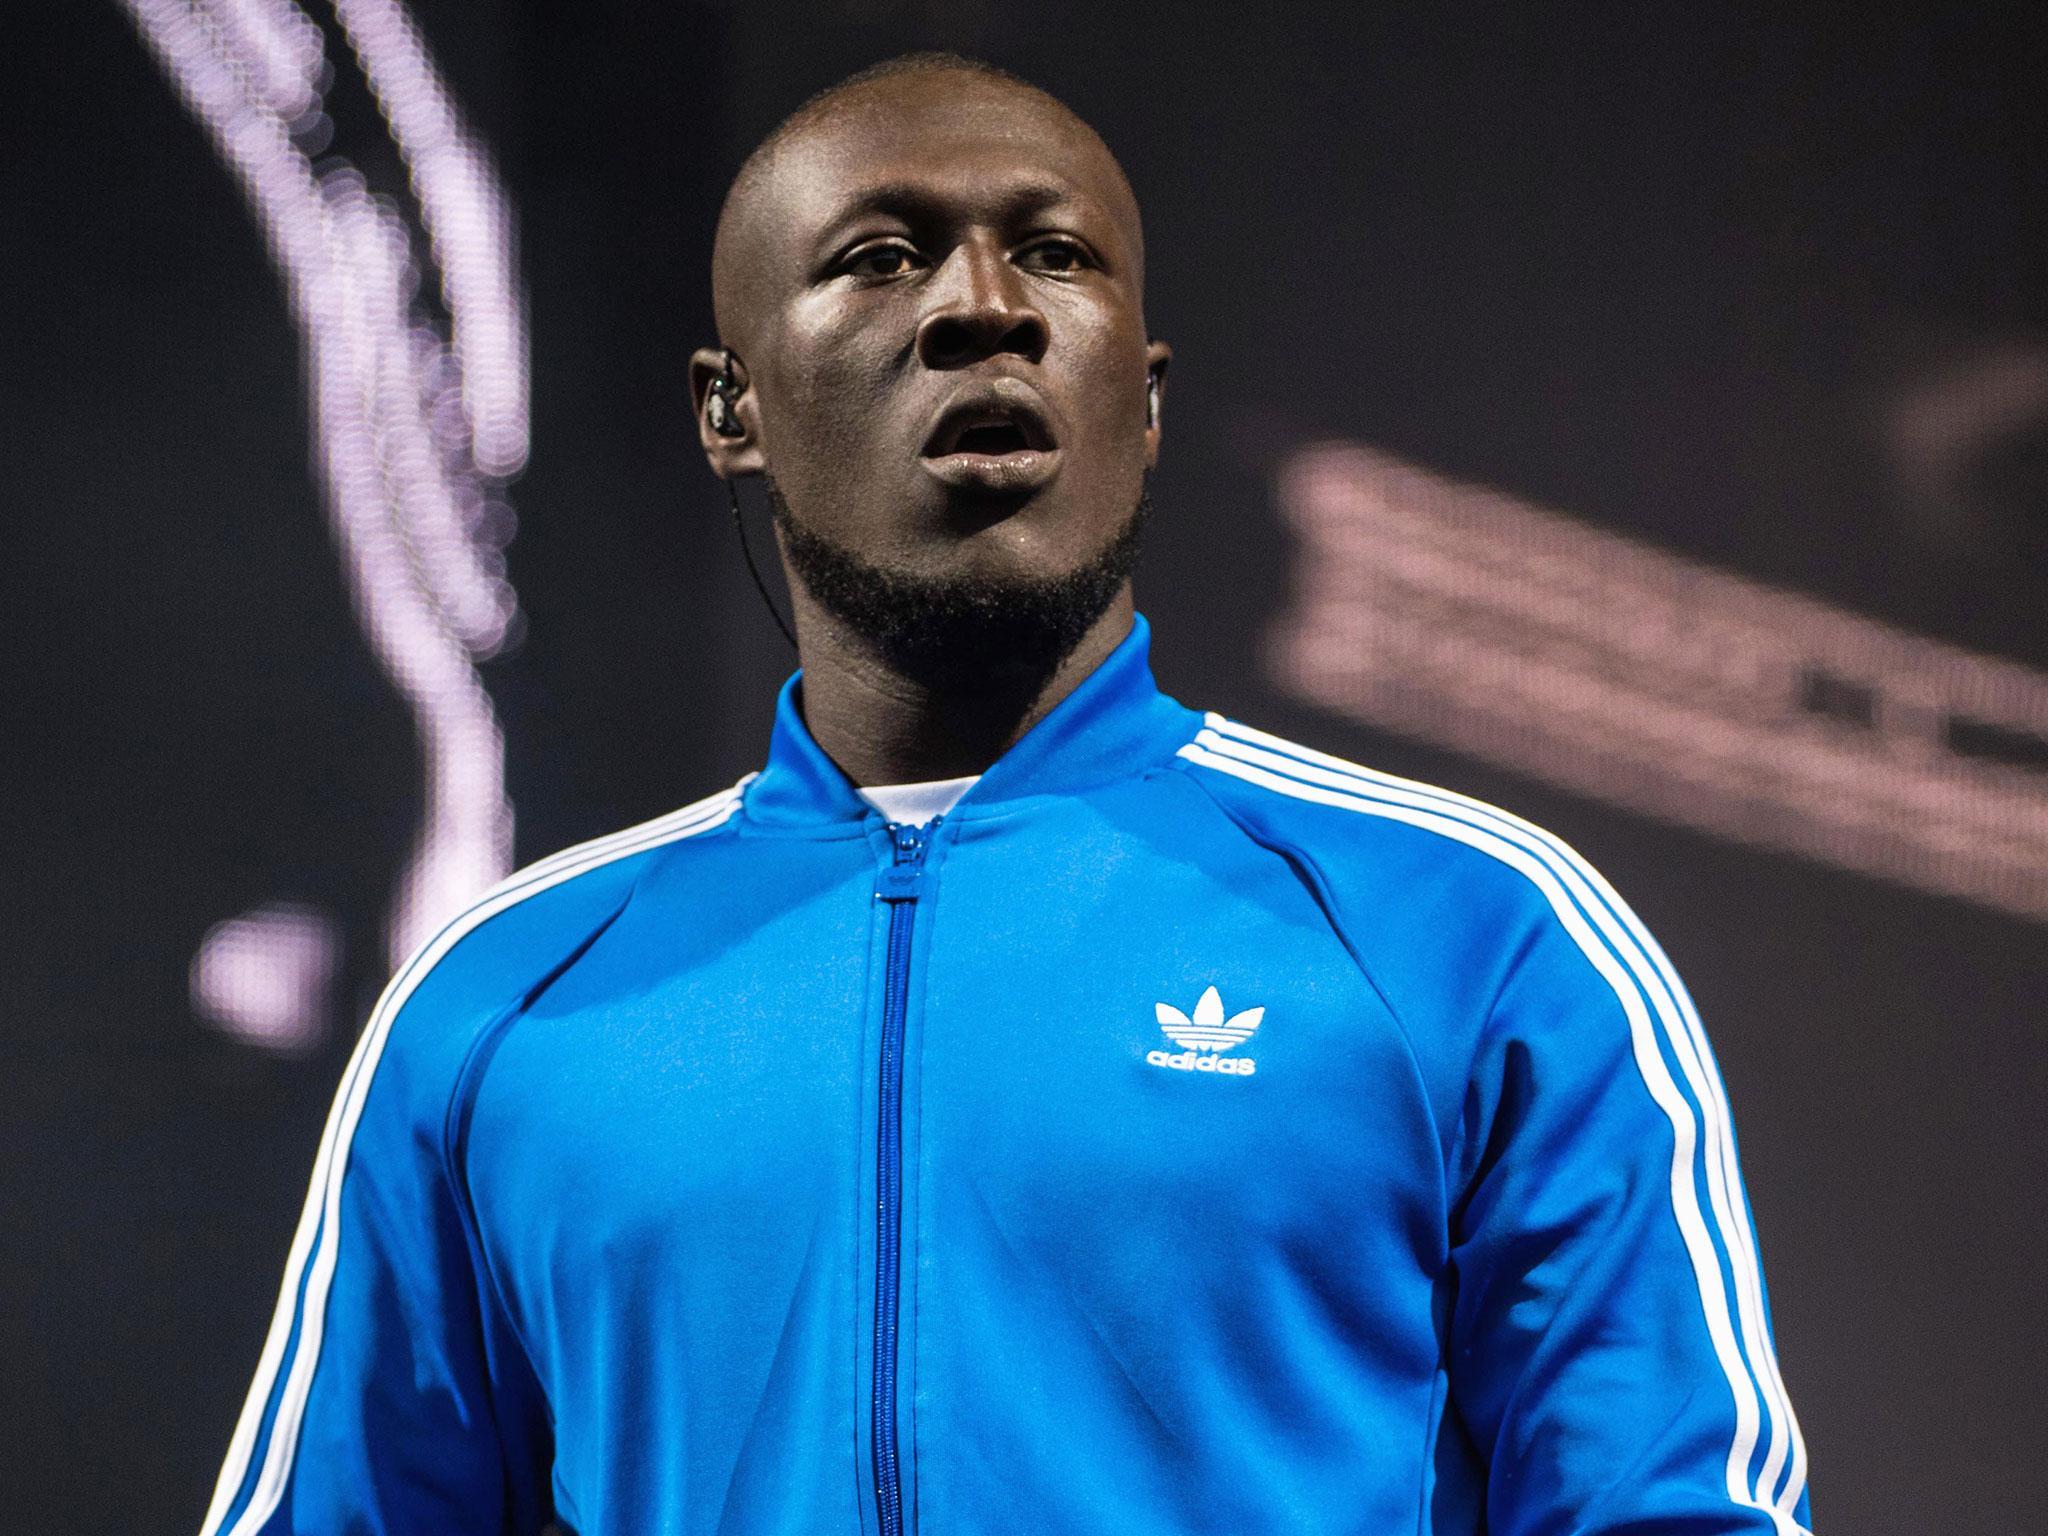 The newspaper mistook grime star Stormzy for Manchester United's latest signing Romelu Lukaku